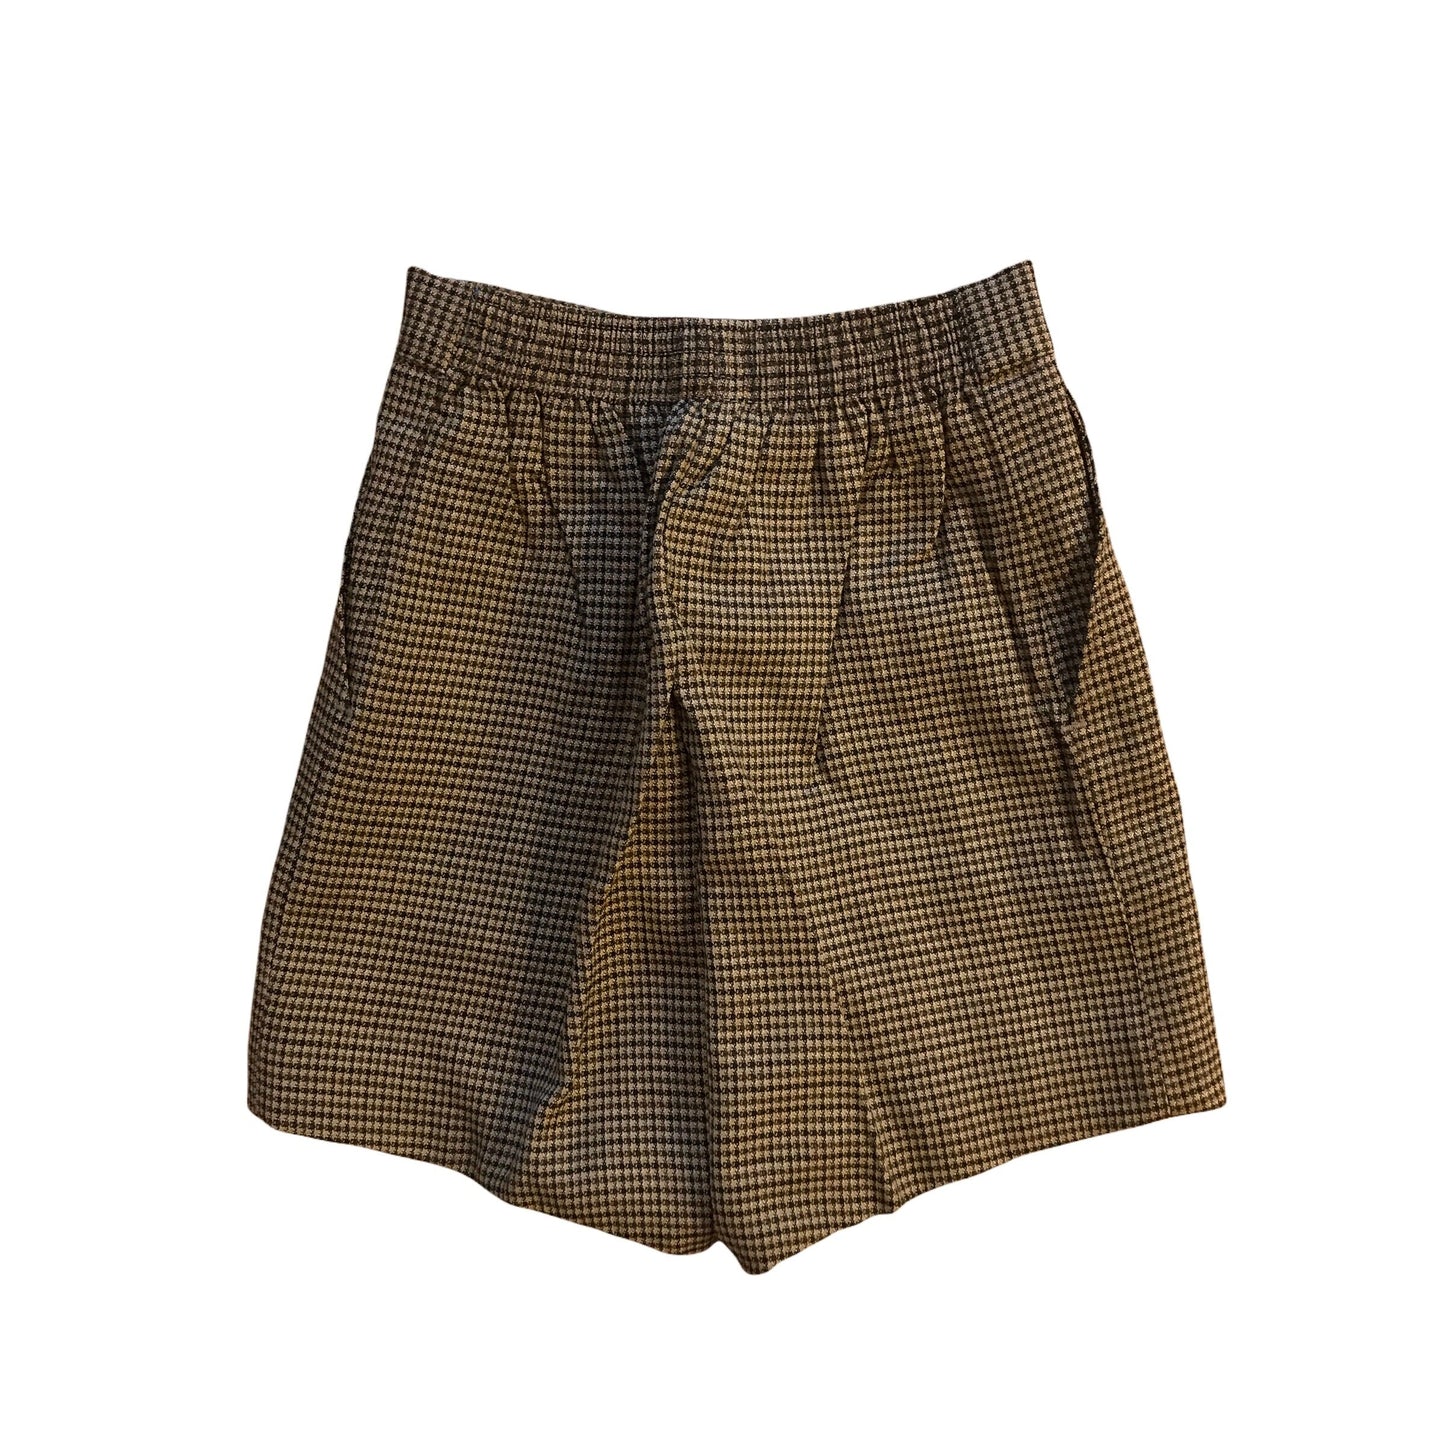 Vintage 1960s Check Green /Brown Houndstooth Shorts / 18-24M